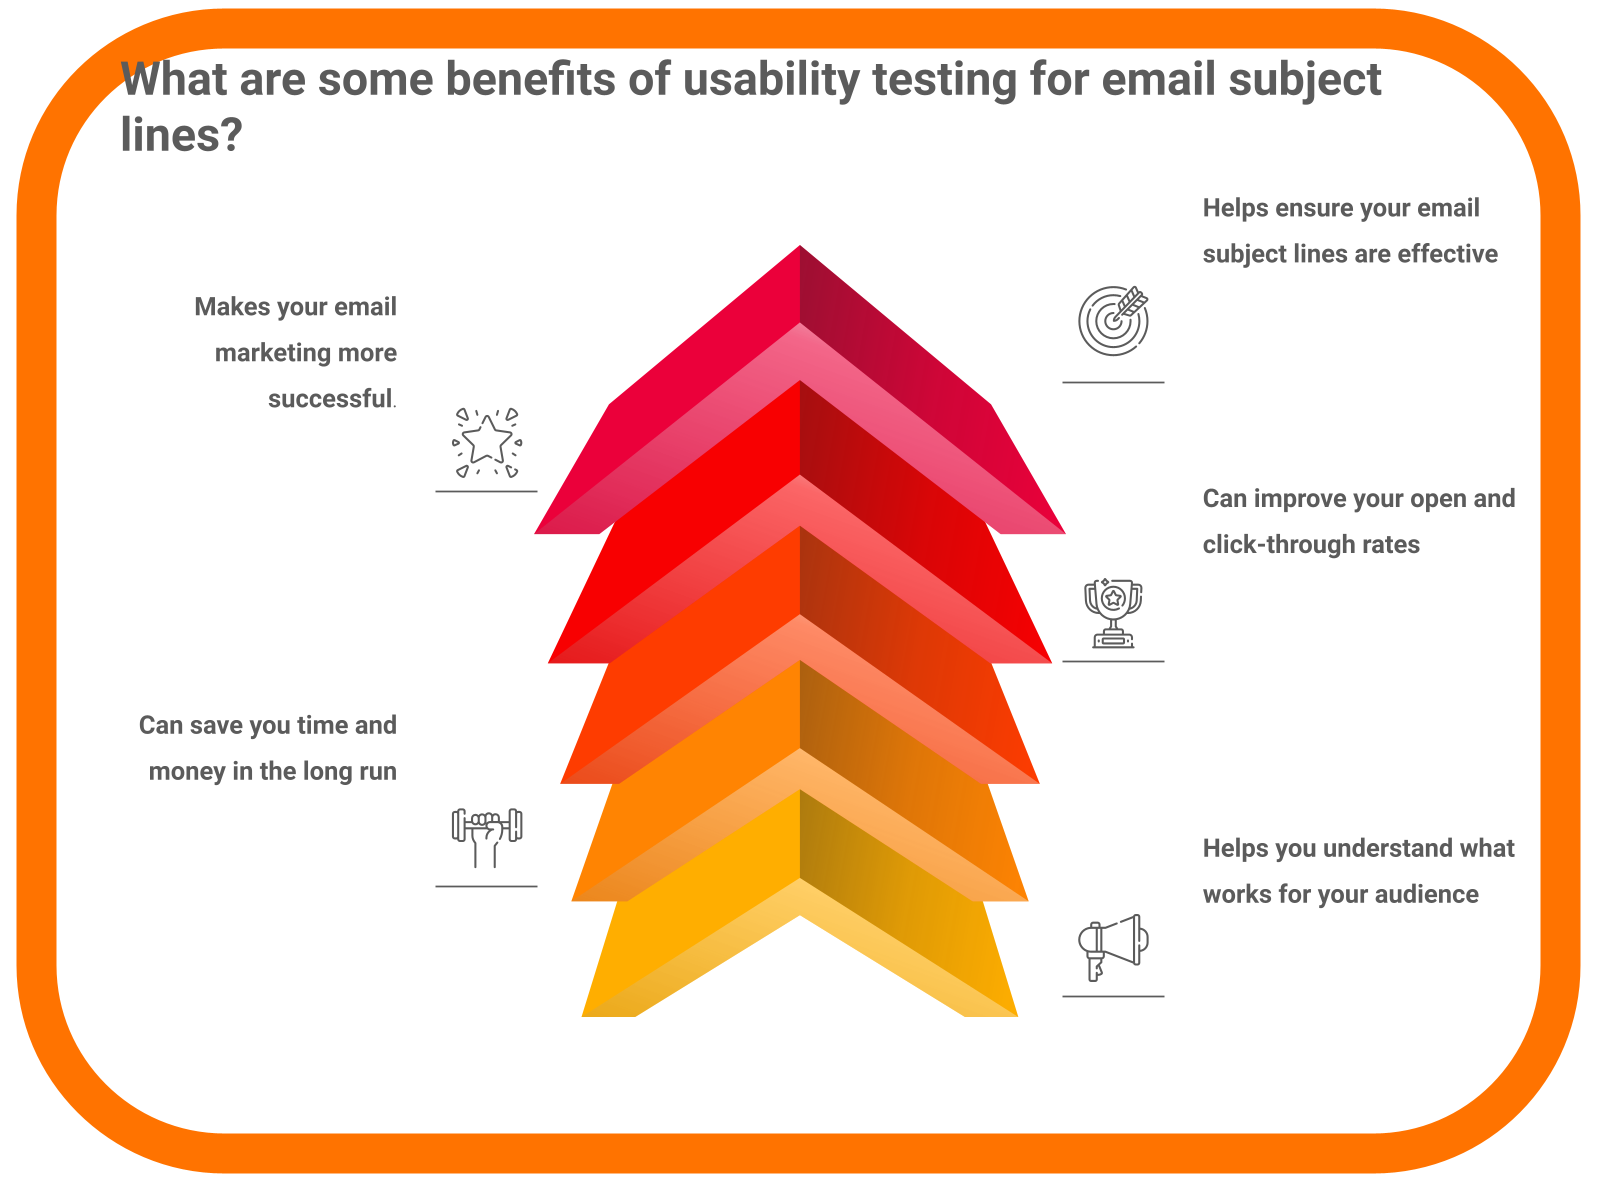 What are some benefits of usability testing for email subject lines?